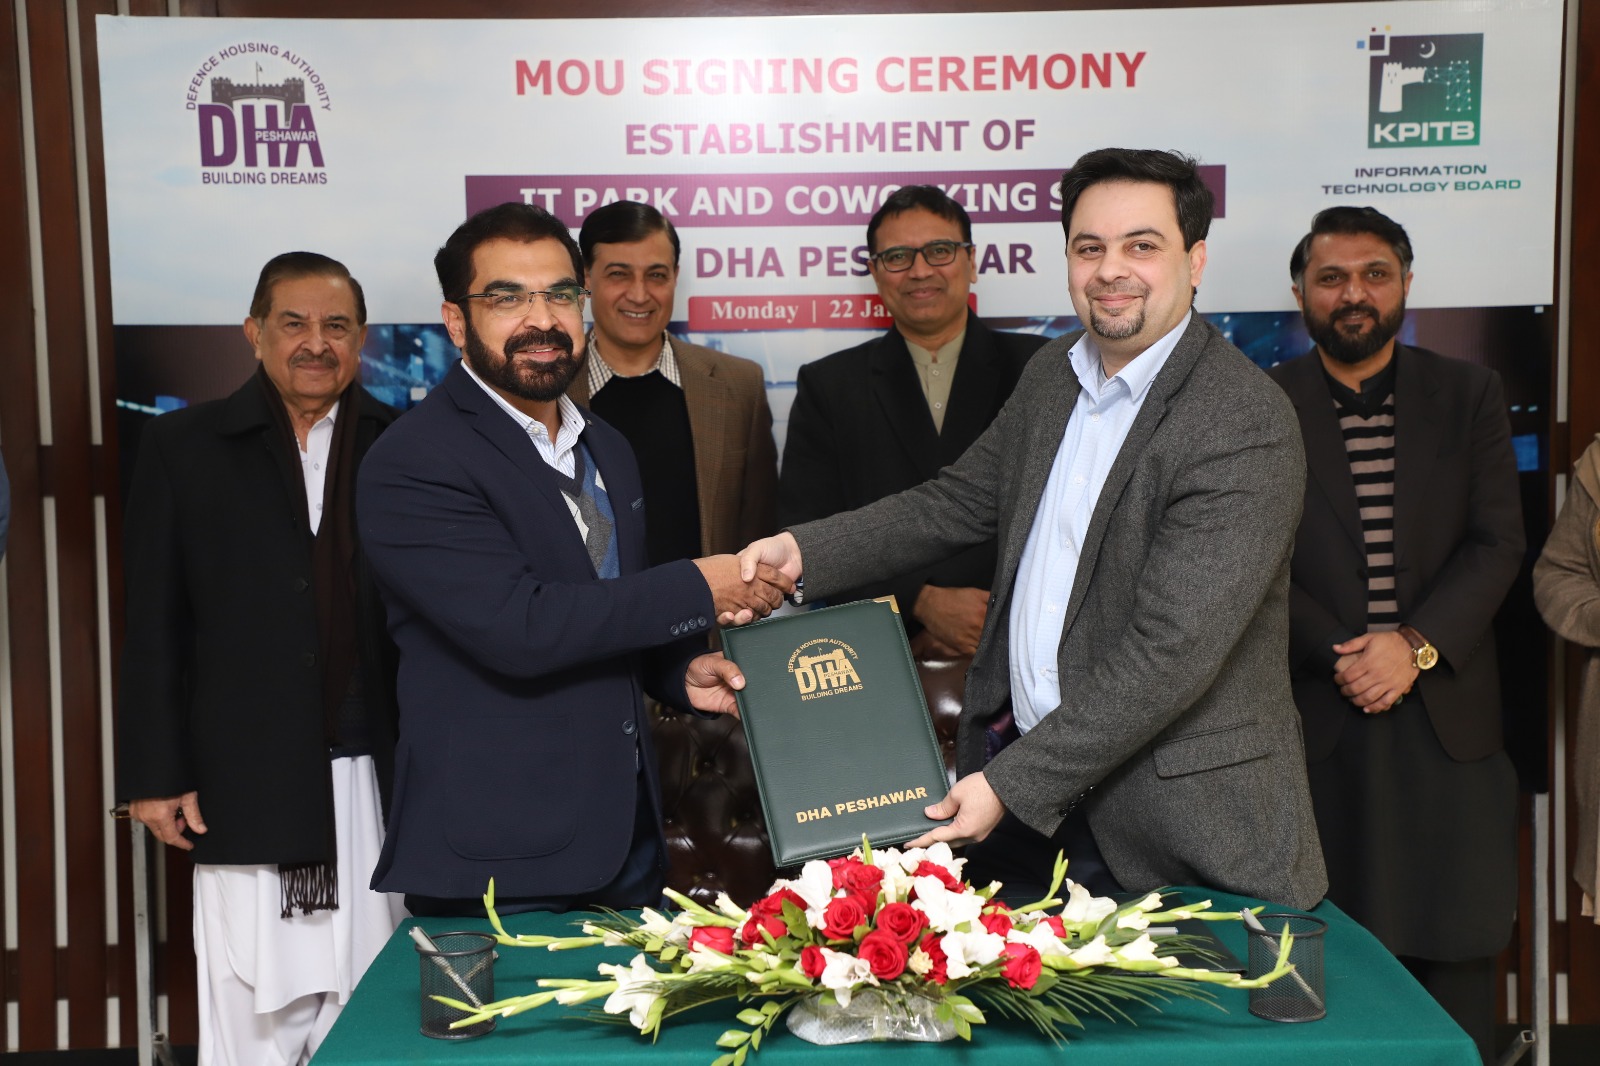 MoU Signed Between DHA Peshawar & KPITB for establishment of IT Park & Coworking Space4.jpeg